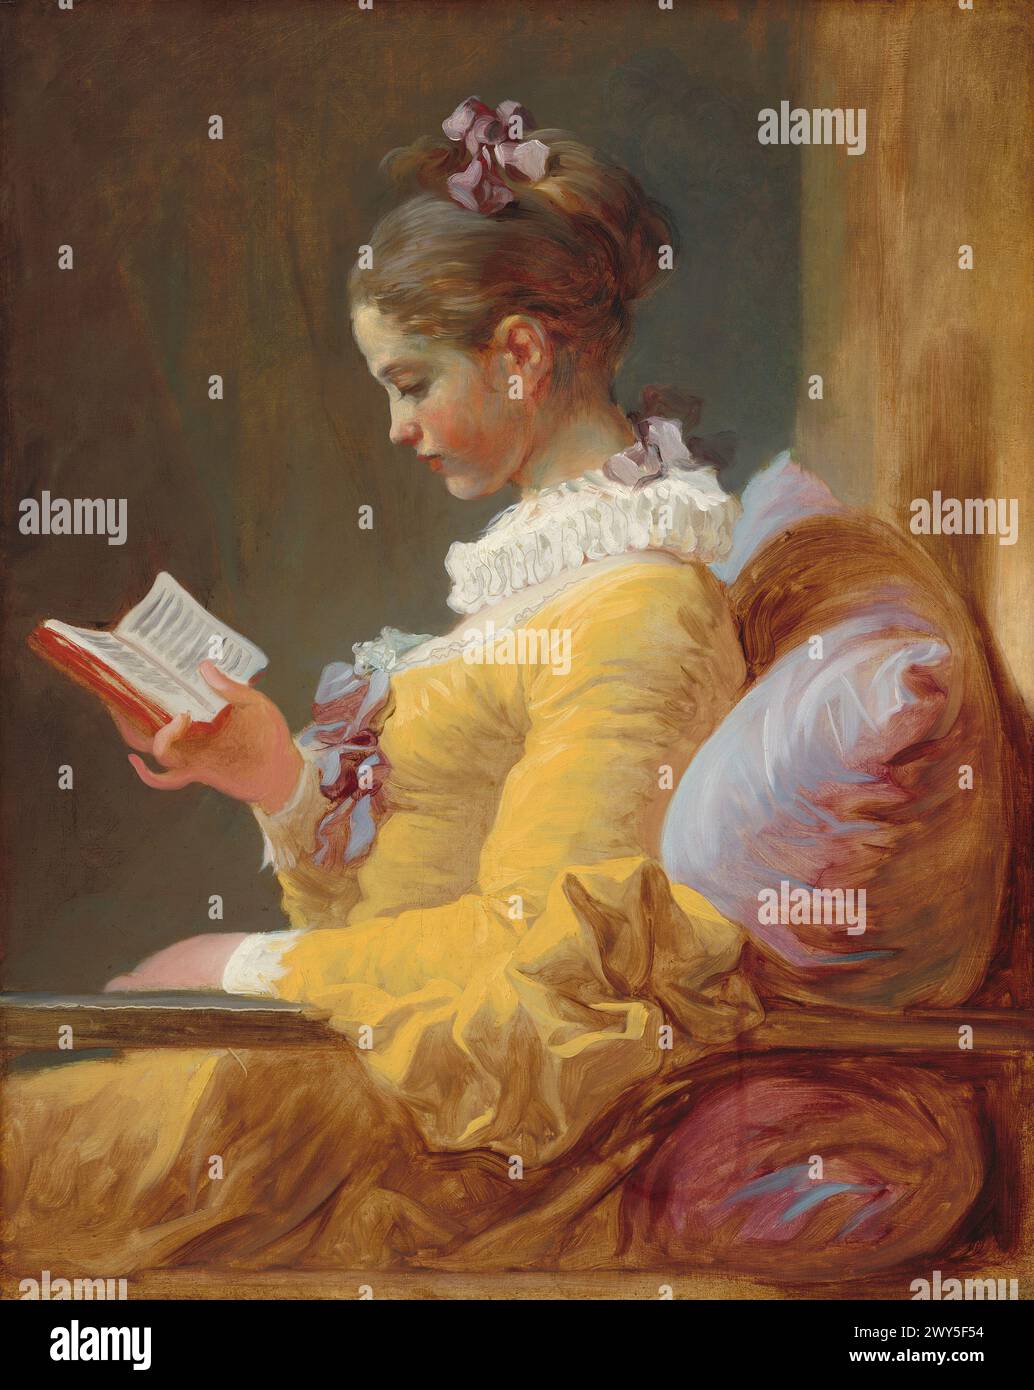 Jean-Honoré Fragonard (French, 1732 - 1806 ), Young Girl Reading, c. 1770, oil on canvas, Gift of Mrs. Mellon Bruce in memory of her father, Andrew W. Mellon Stock Photo